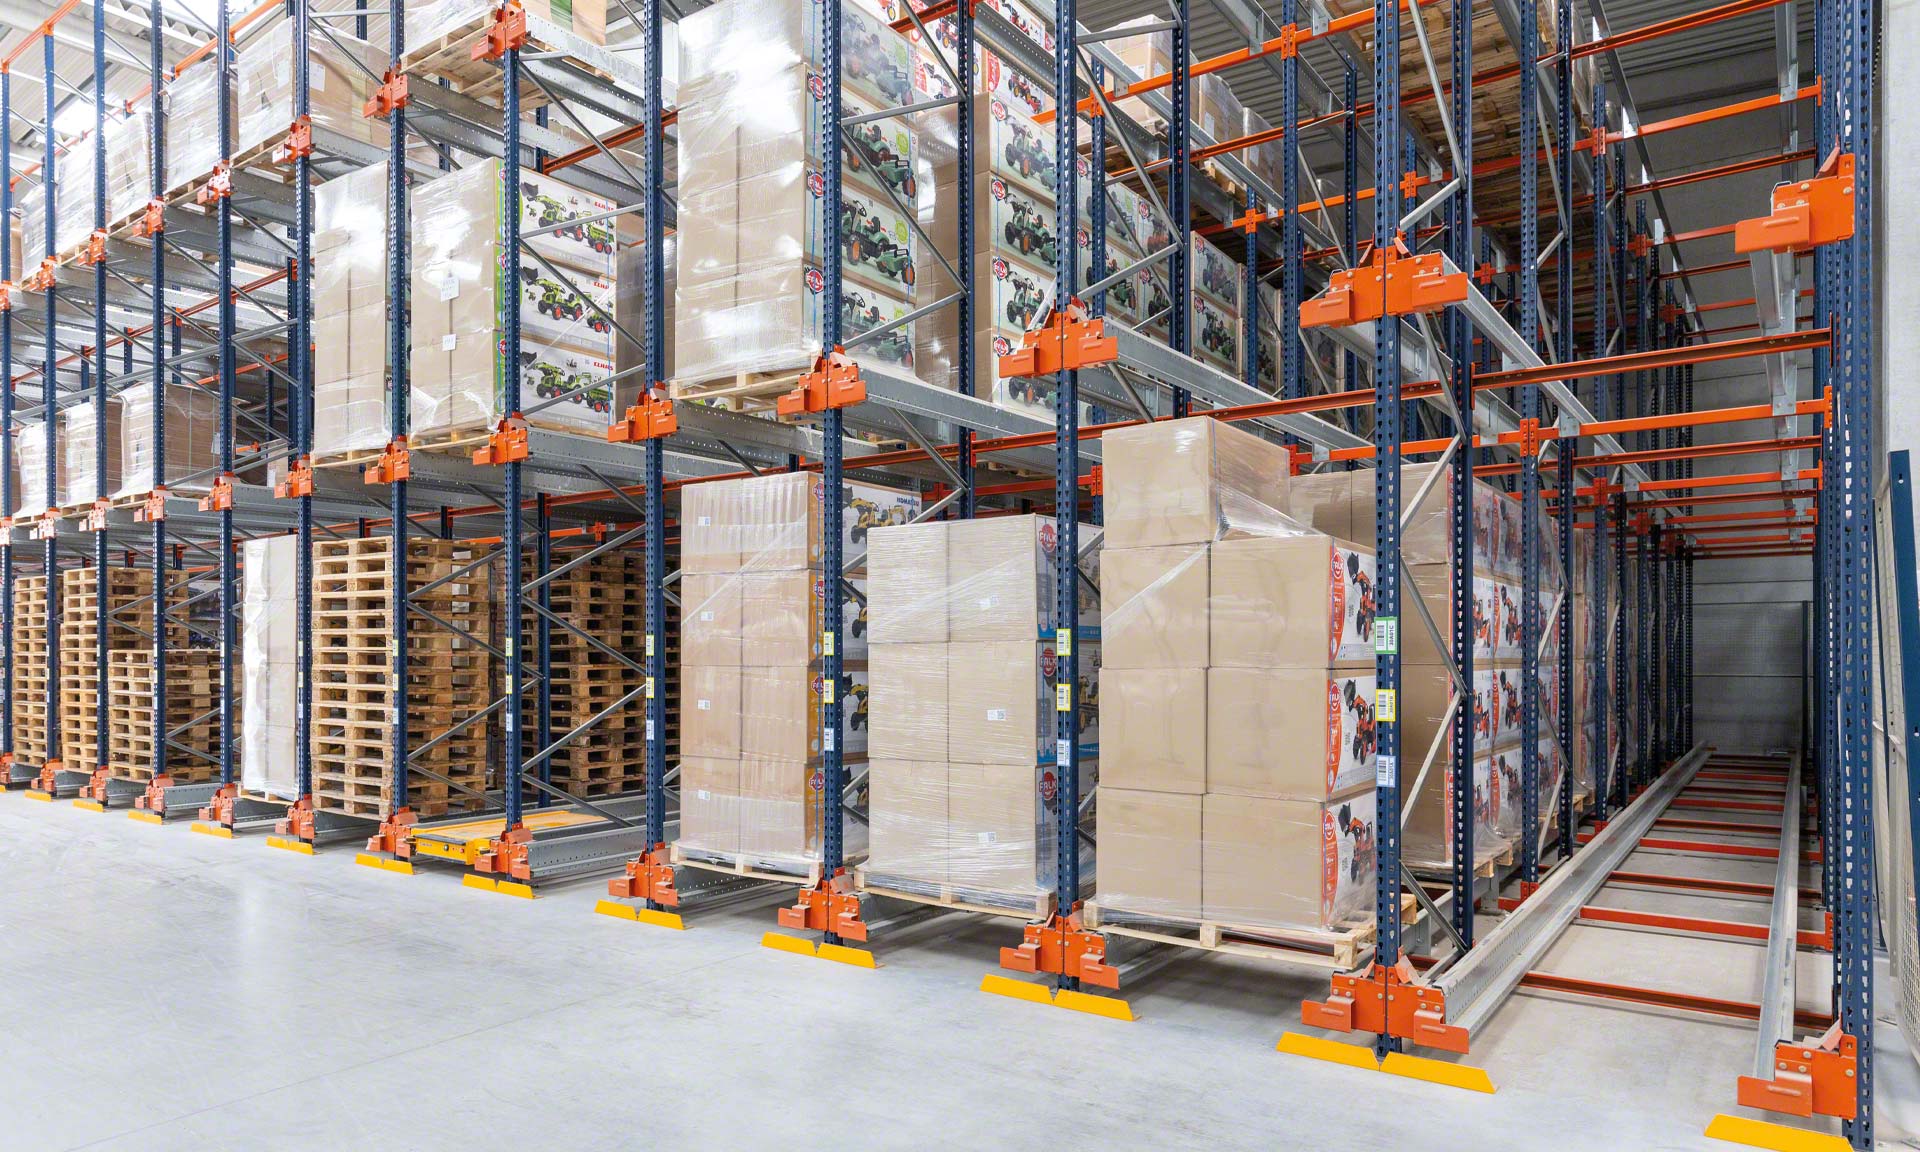 Falk Toys optimises storage with automated internal transport solutions